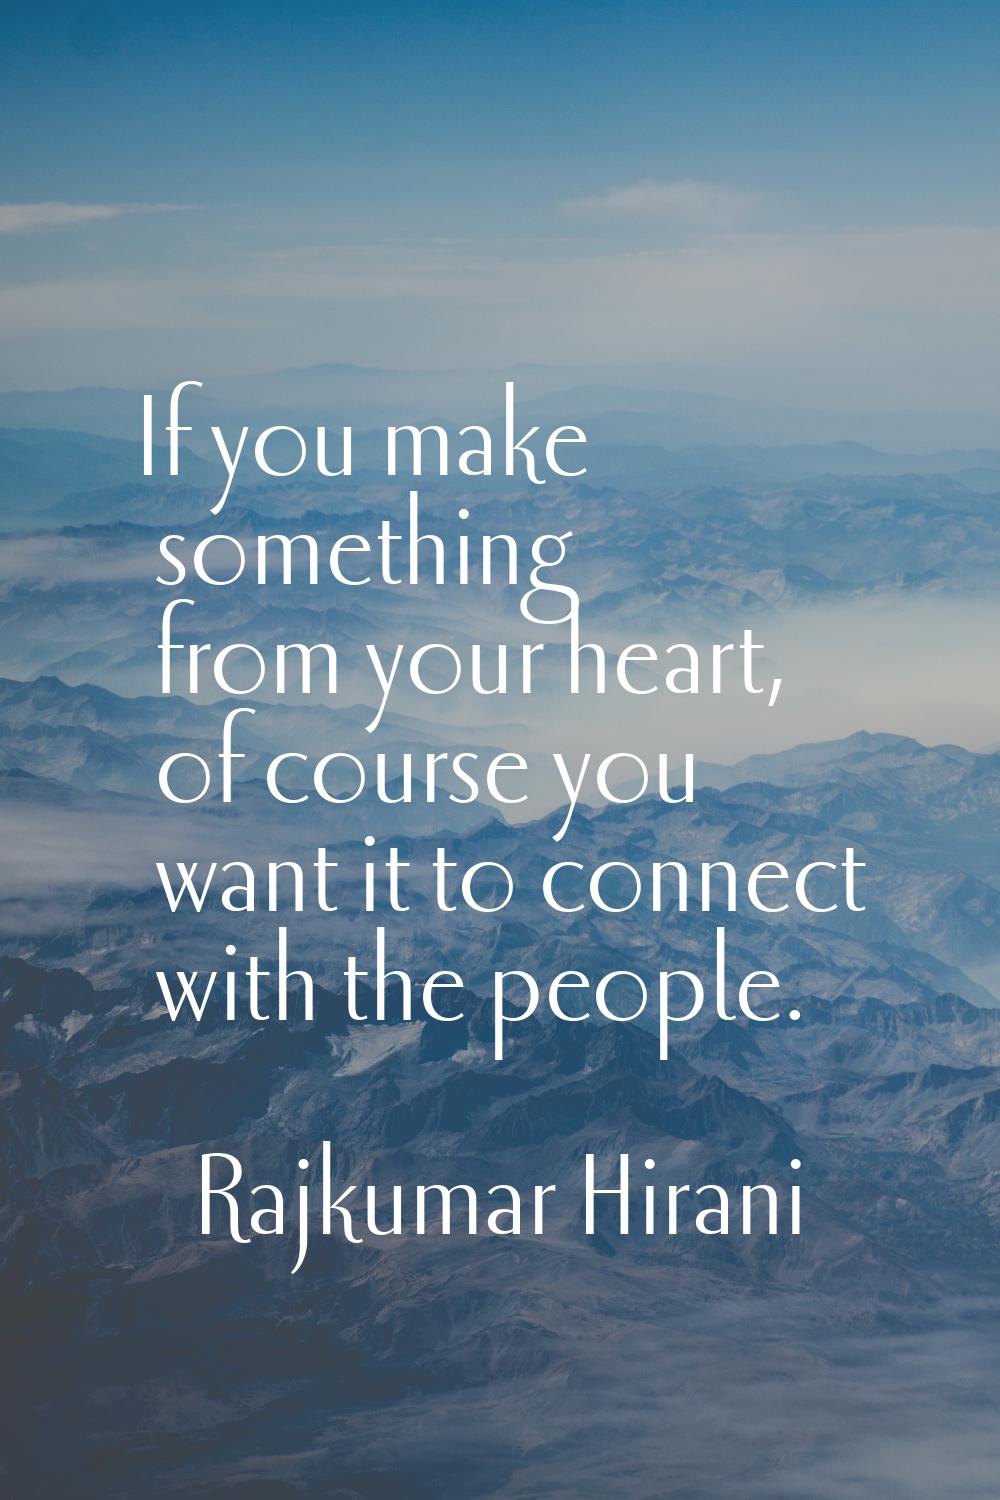 If you make something from your heart, of course you want it to connect with the people.